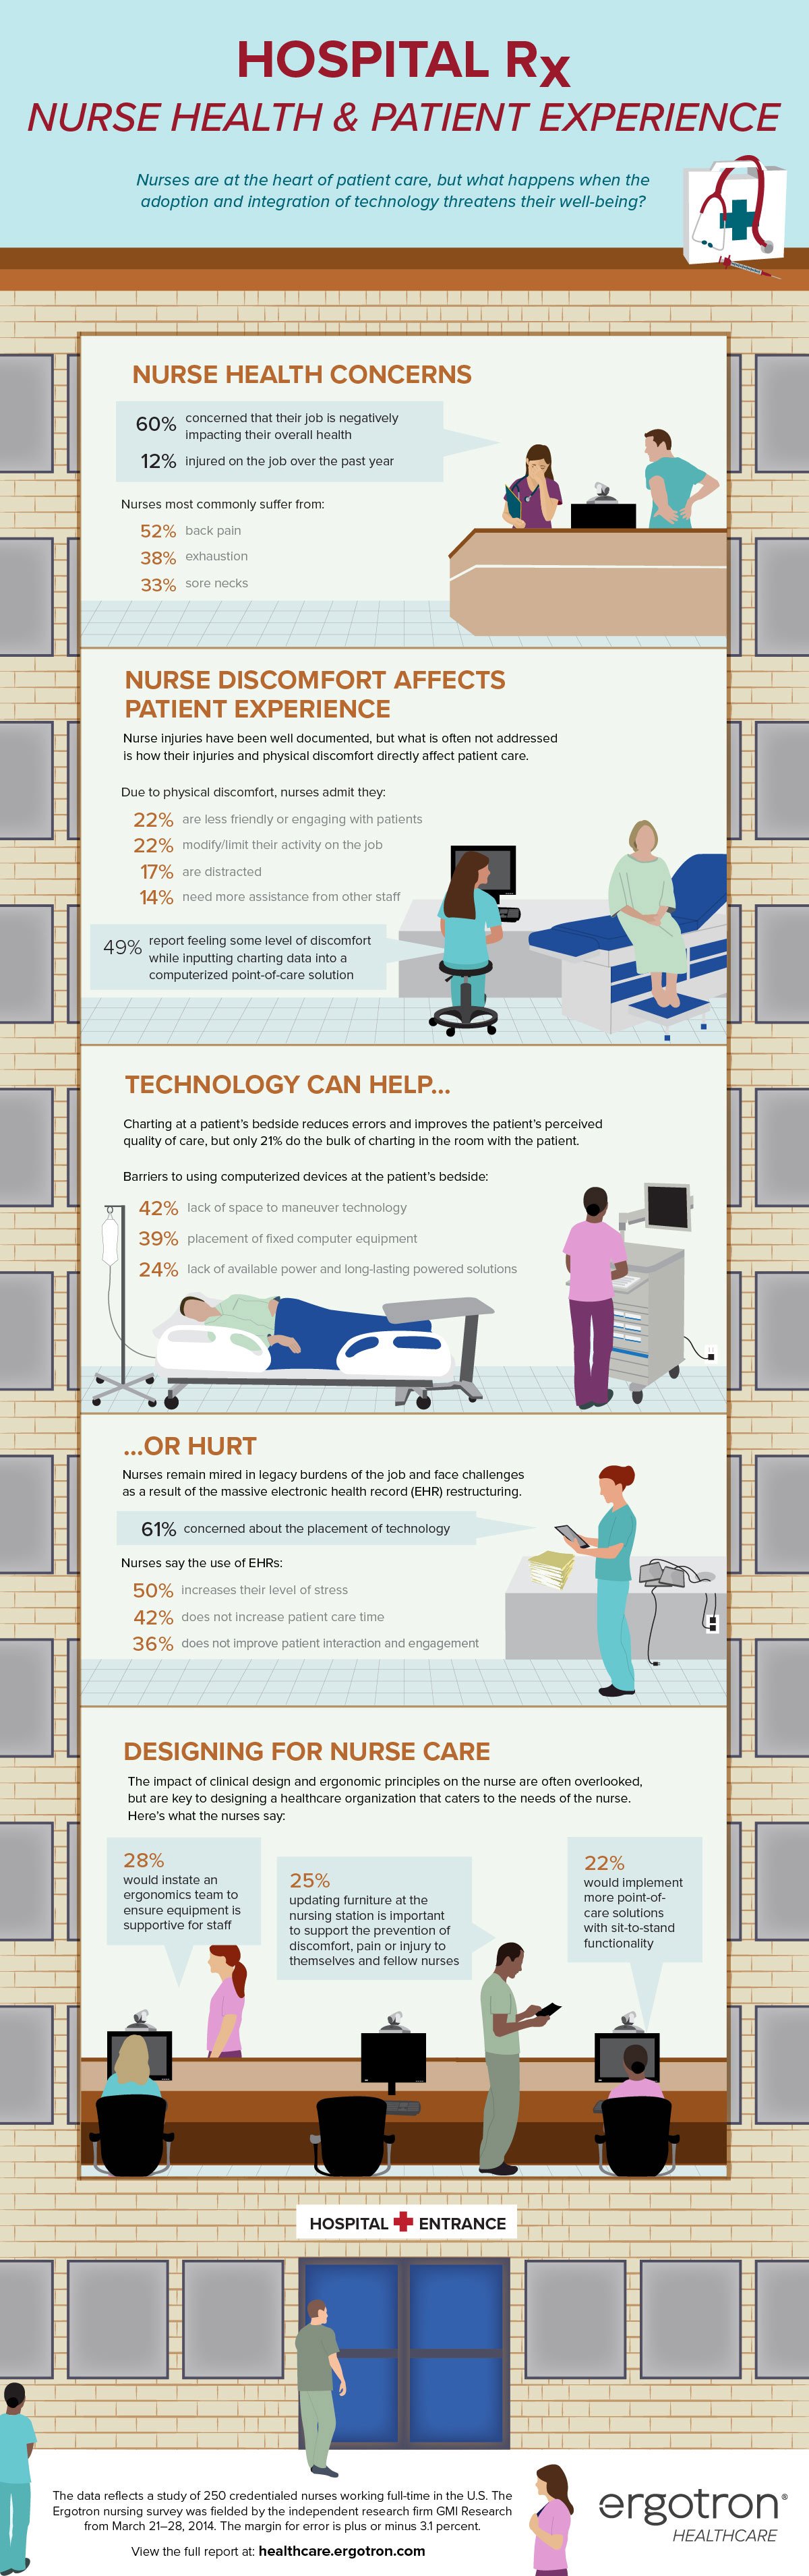 Nursing Challenges and Changes infographic